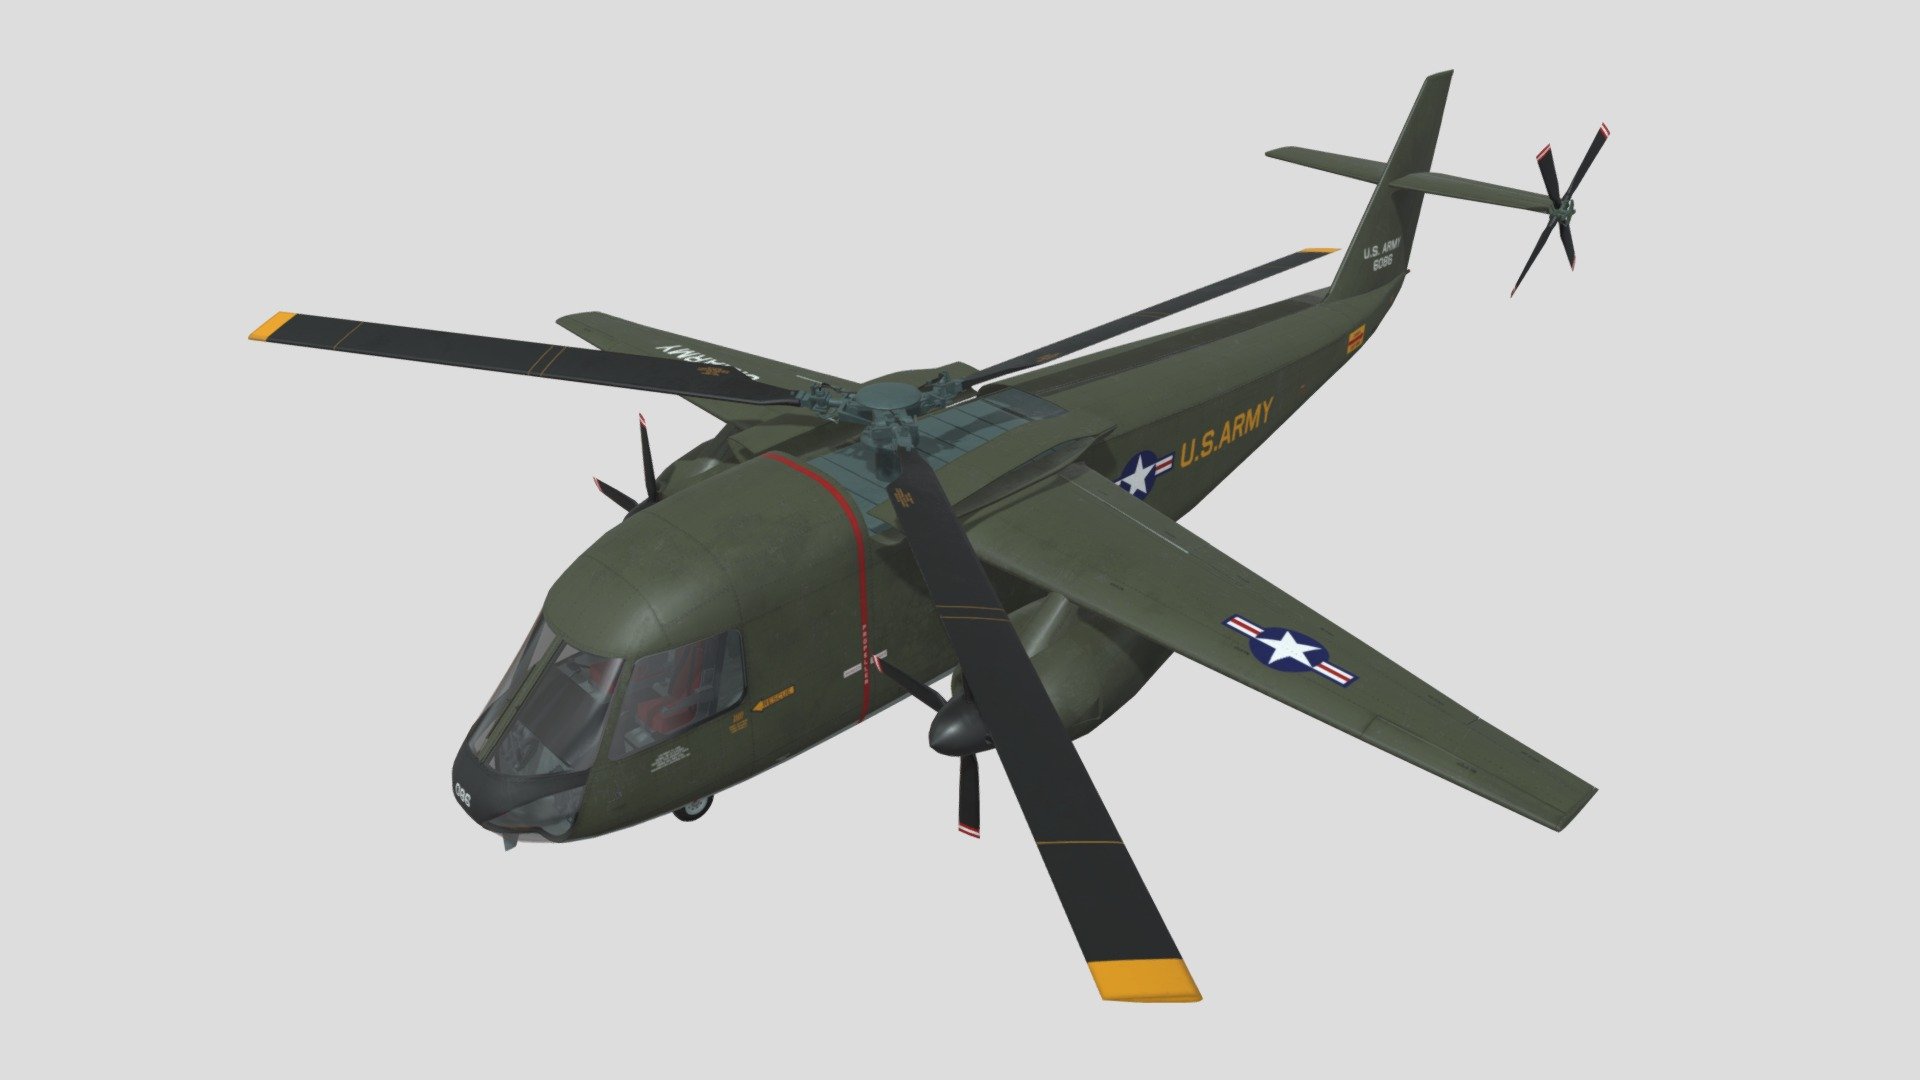 In the mid-1960s, various forms of VTOL were all the rage. In 1965, Lockheed responded to the U.S. Army's RFP with the CL-945 concept, a design for a retractable rotor helicopter. At low speeds and hovering, it will operate as a helicopter; at higher speeds, an aircraft-style propulsion system will power it; at much higher speeds than helicopters typically achieve, the rotors will stop spinning, and Fold back and stow away for minimal resistance. This is a great idea, but there is a small problem, it is very complicated, heavy and expensive 3d model